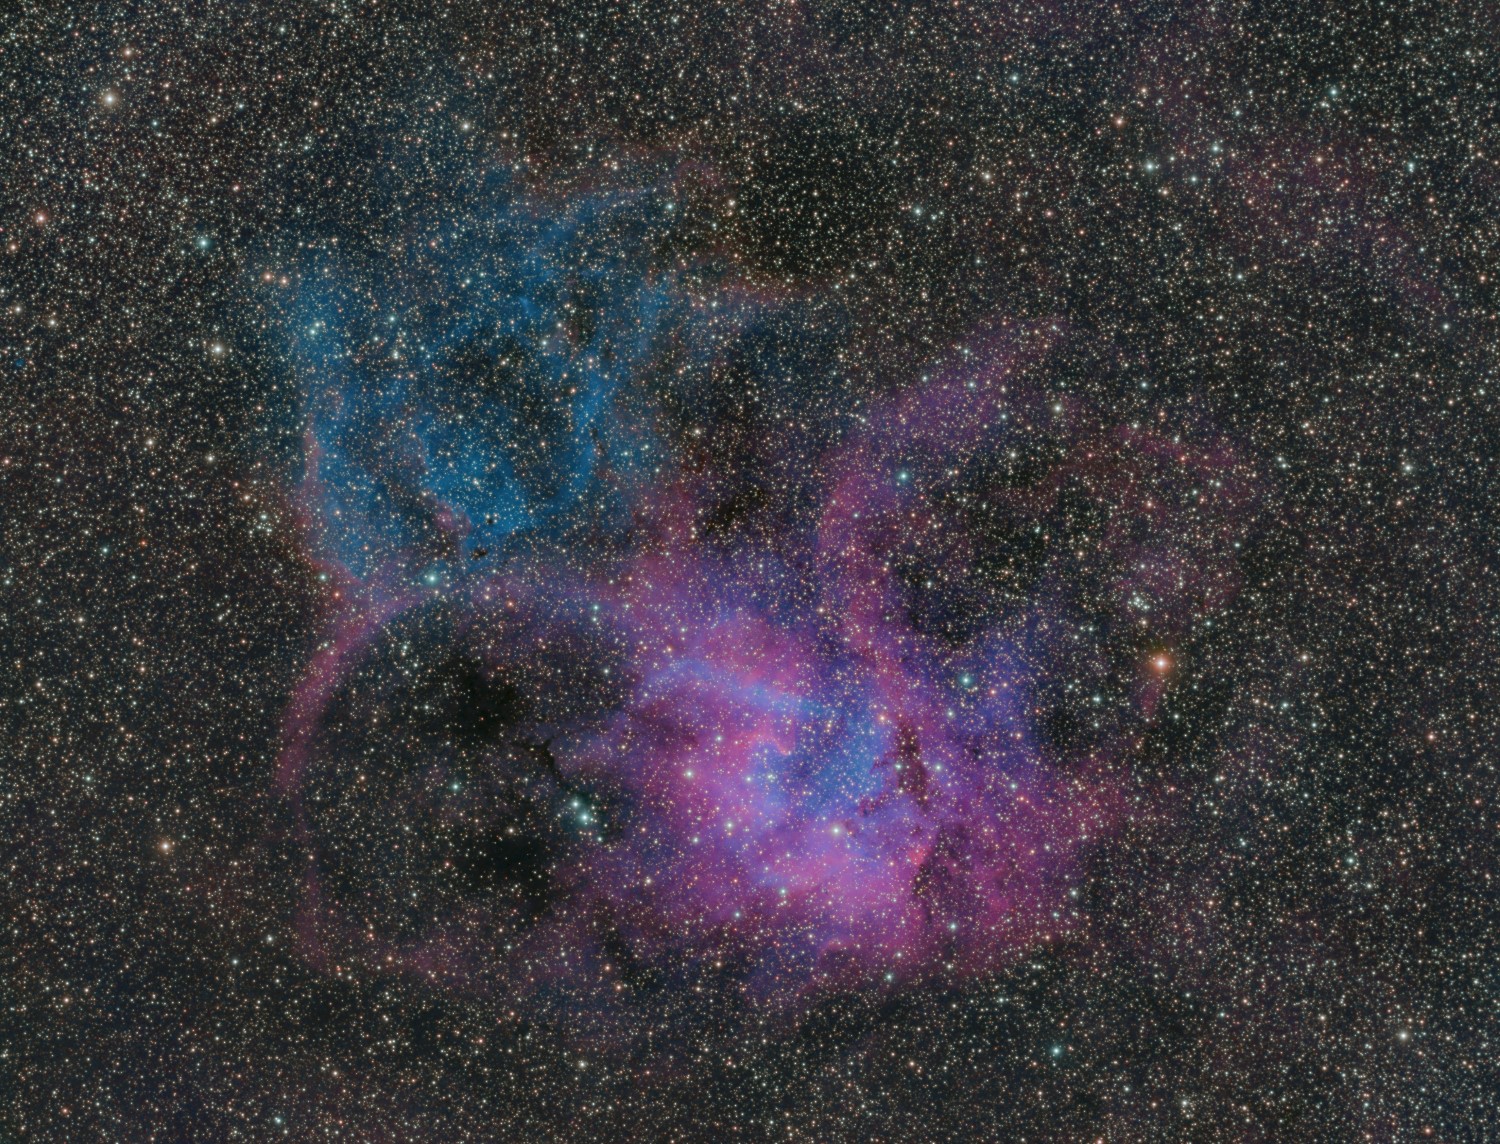 dimred with narrowband images